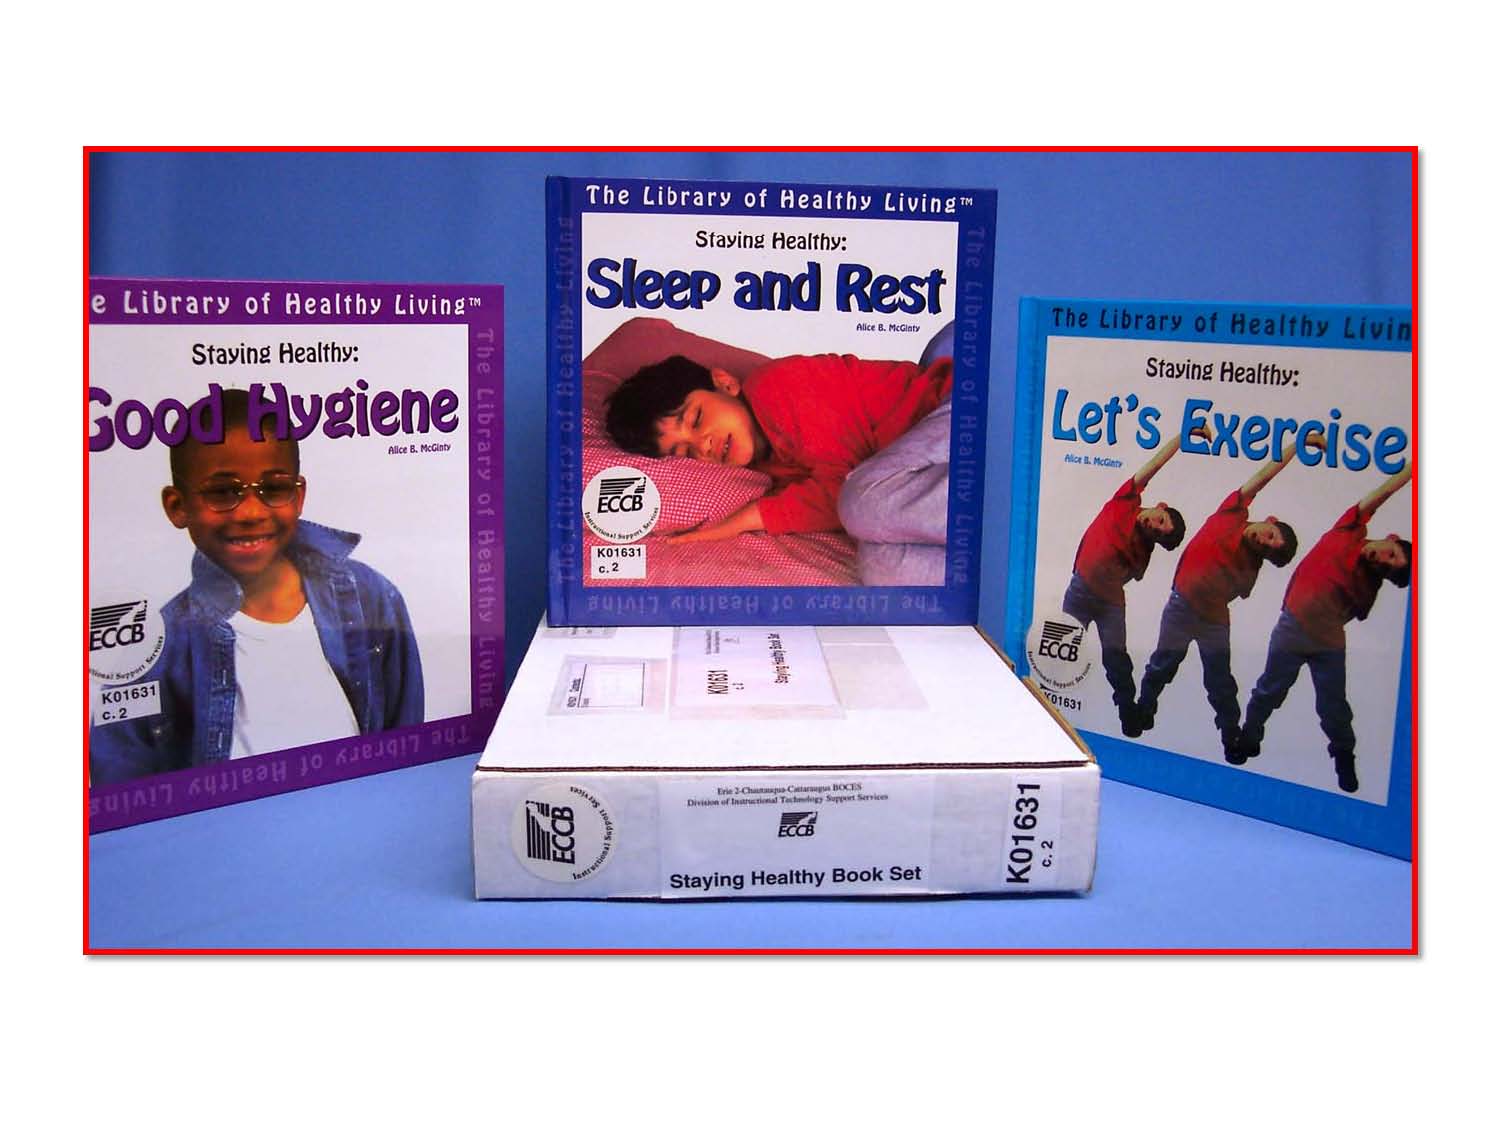 Staying Healthy Book Set